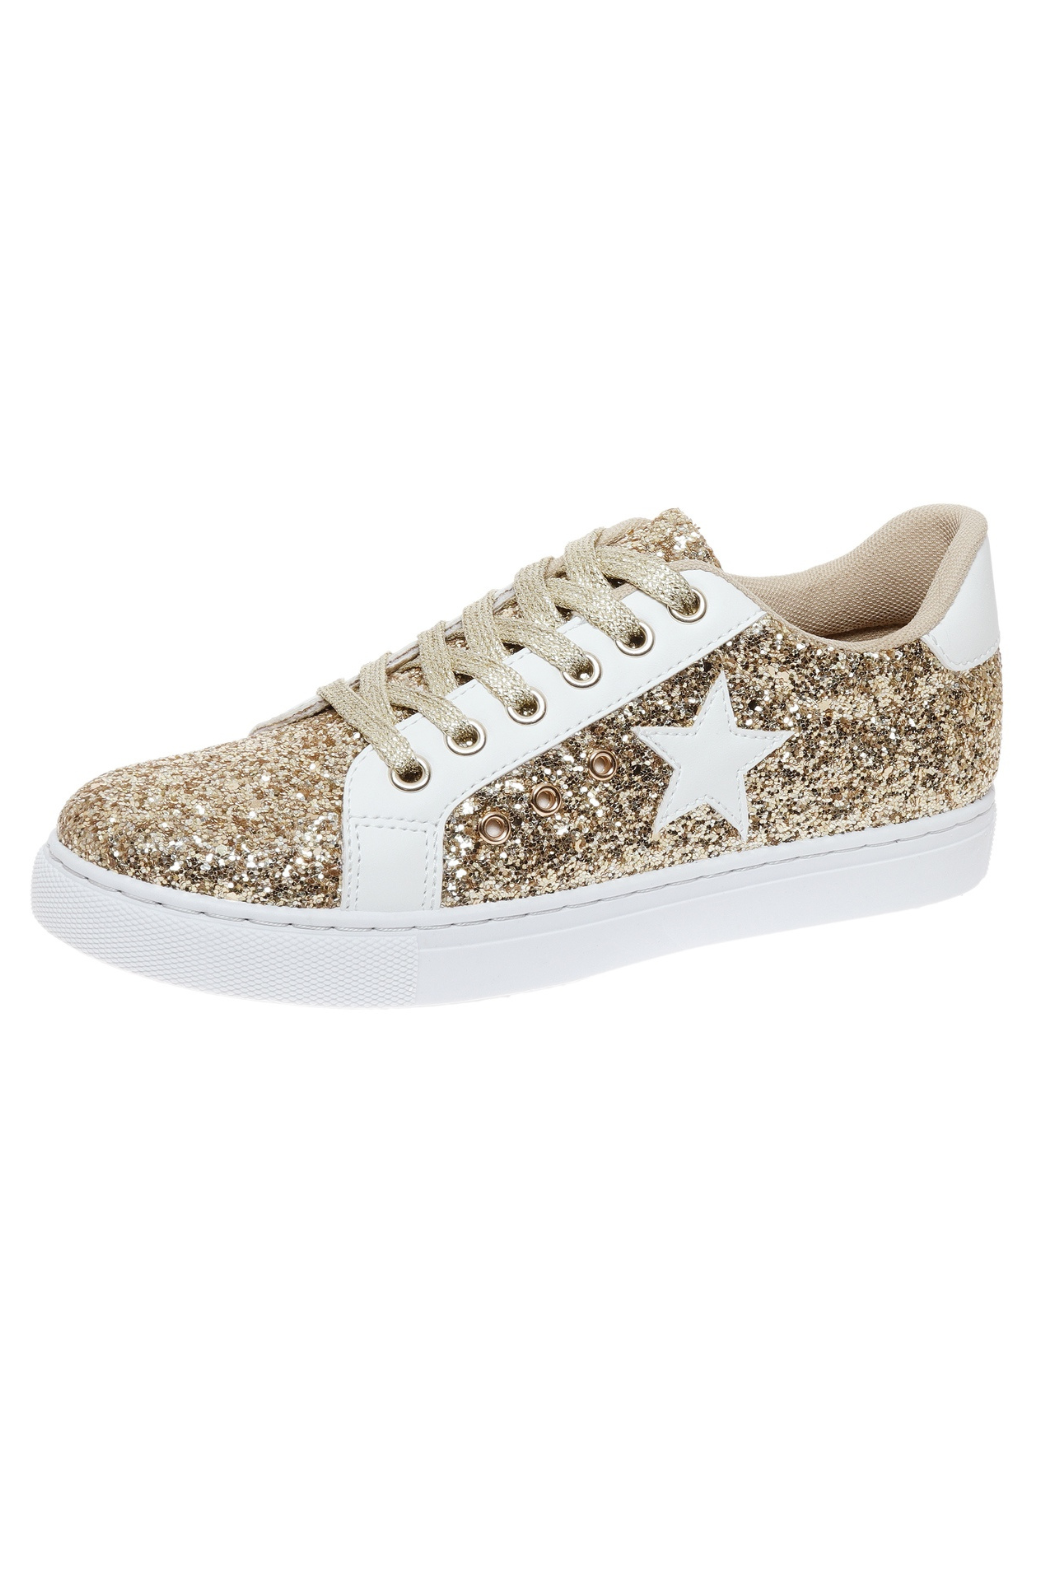 BELOS Women's Glitter Shoes Sparkly Lightweight Metallic Sequins Tennis  Shoes Size: 6: Buy Online in the UAE, Price from 521 EAD & Shipping to  Dubai